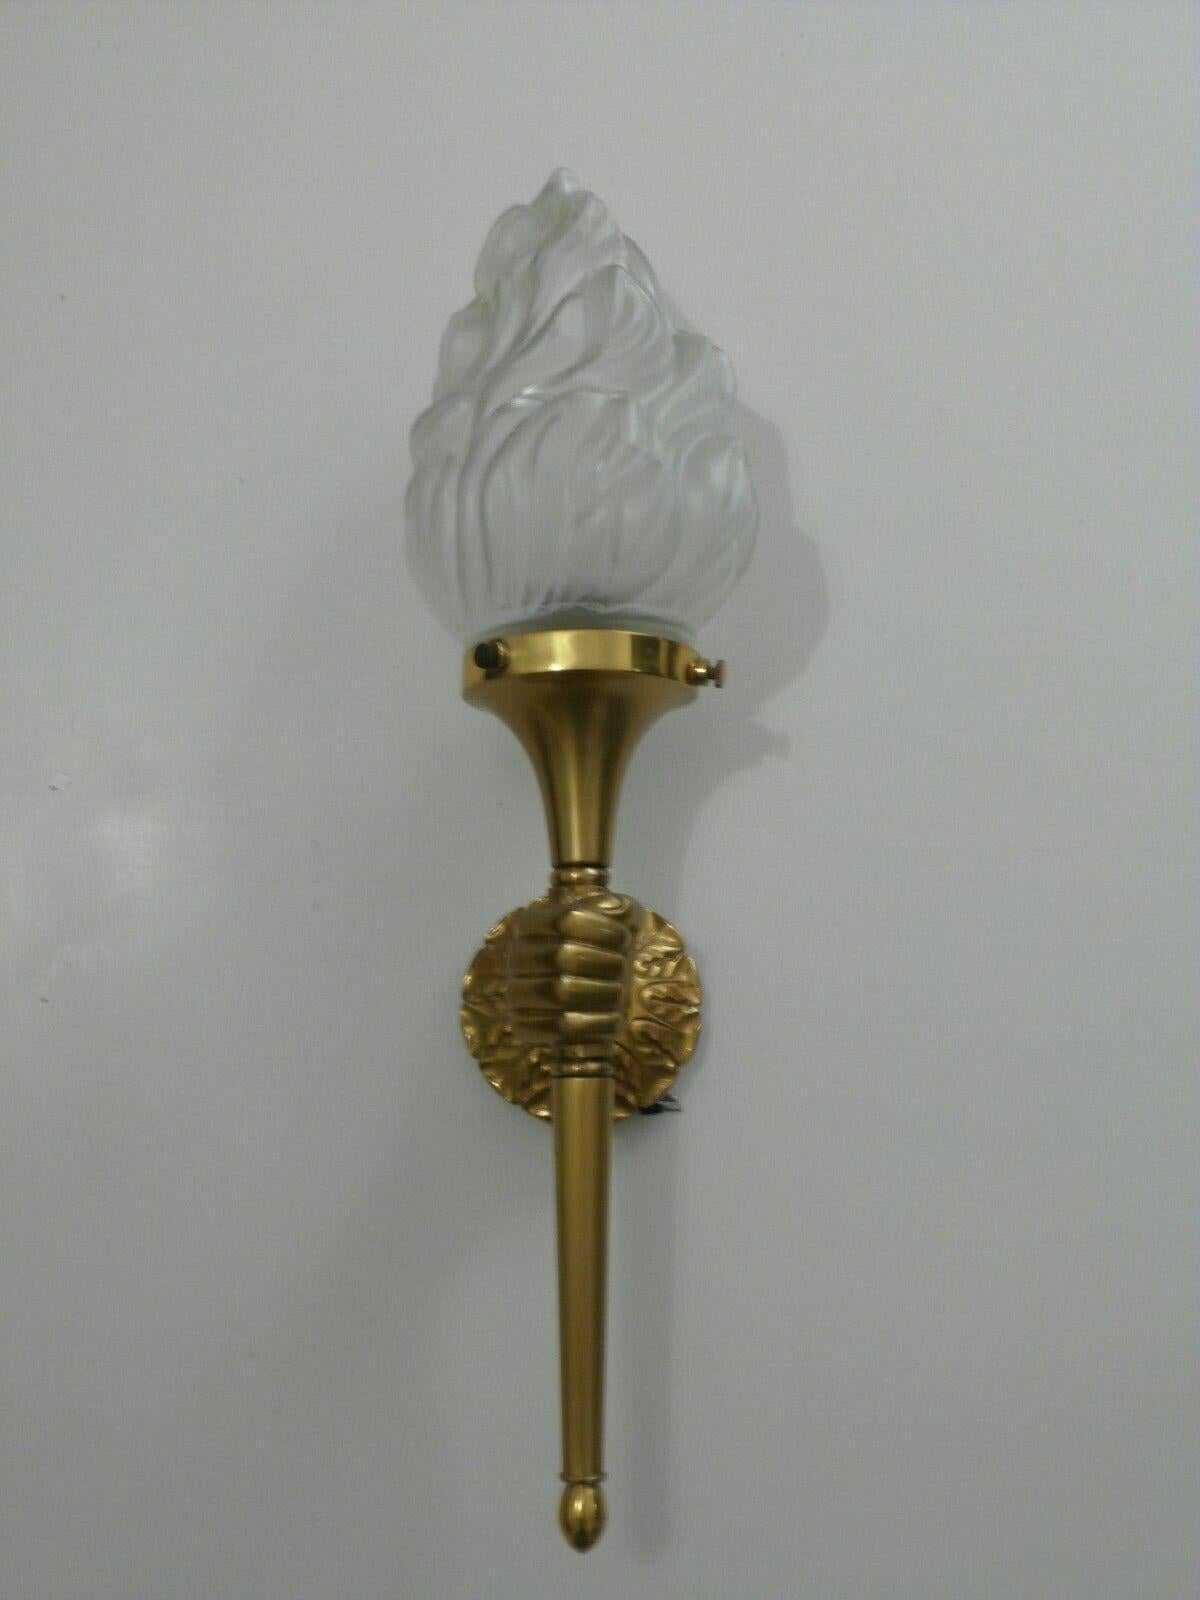 1930's French Art Deco Gilt Bronze Hand / Fist Holding Torch Wall Sconce  For Sale 2